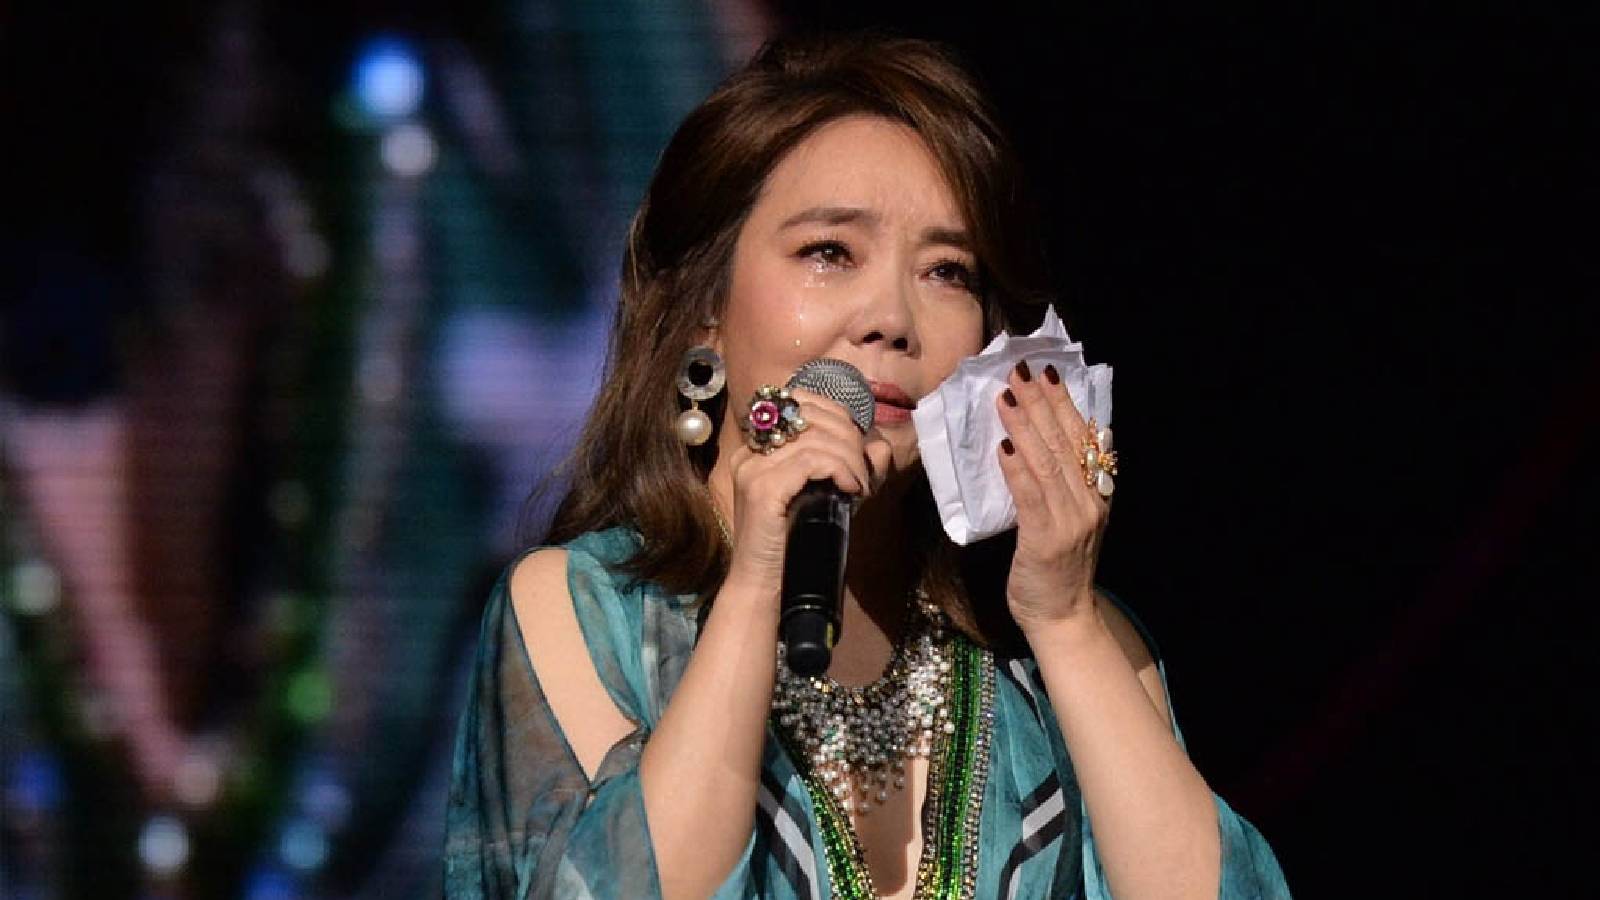 Winnie Hsin’s 2020 Concert Was Postponed And Eventually Cancelled Last Year, But Fans Still Have Not Received Their Refunds